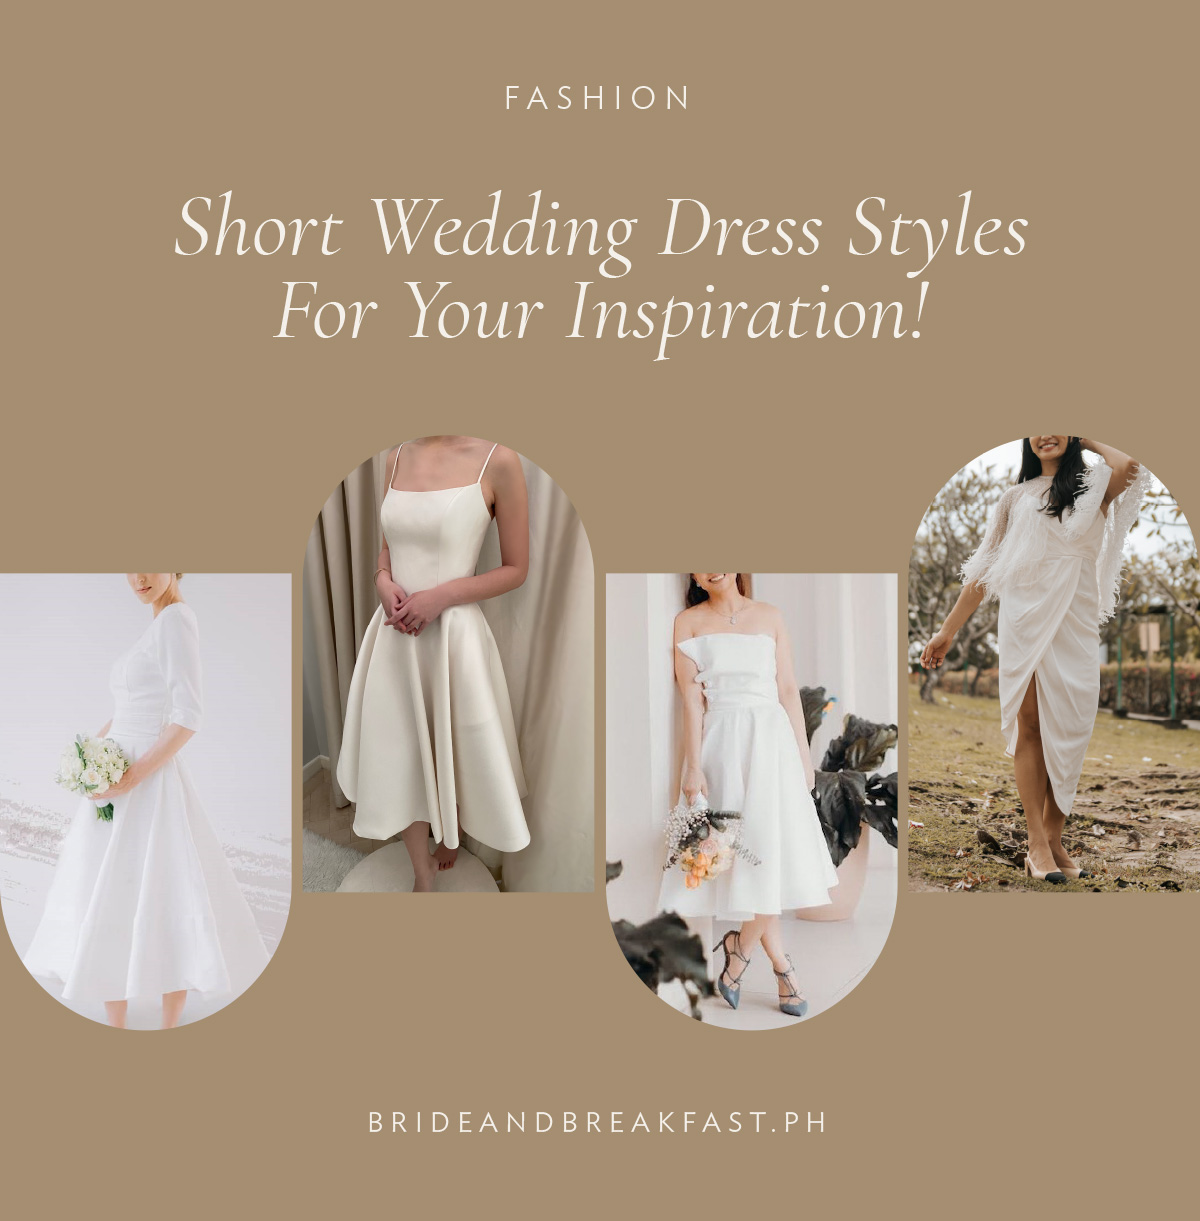 Short Wedding Dress Styles For Your Inspiration!